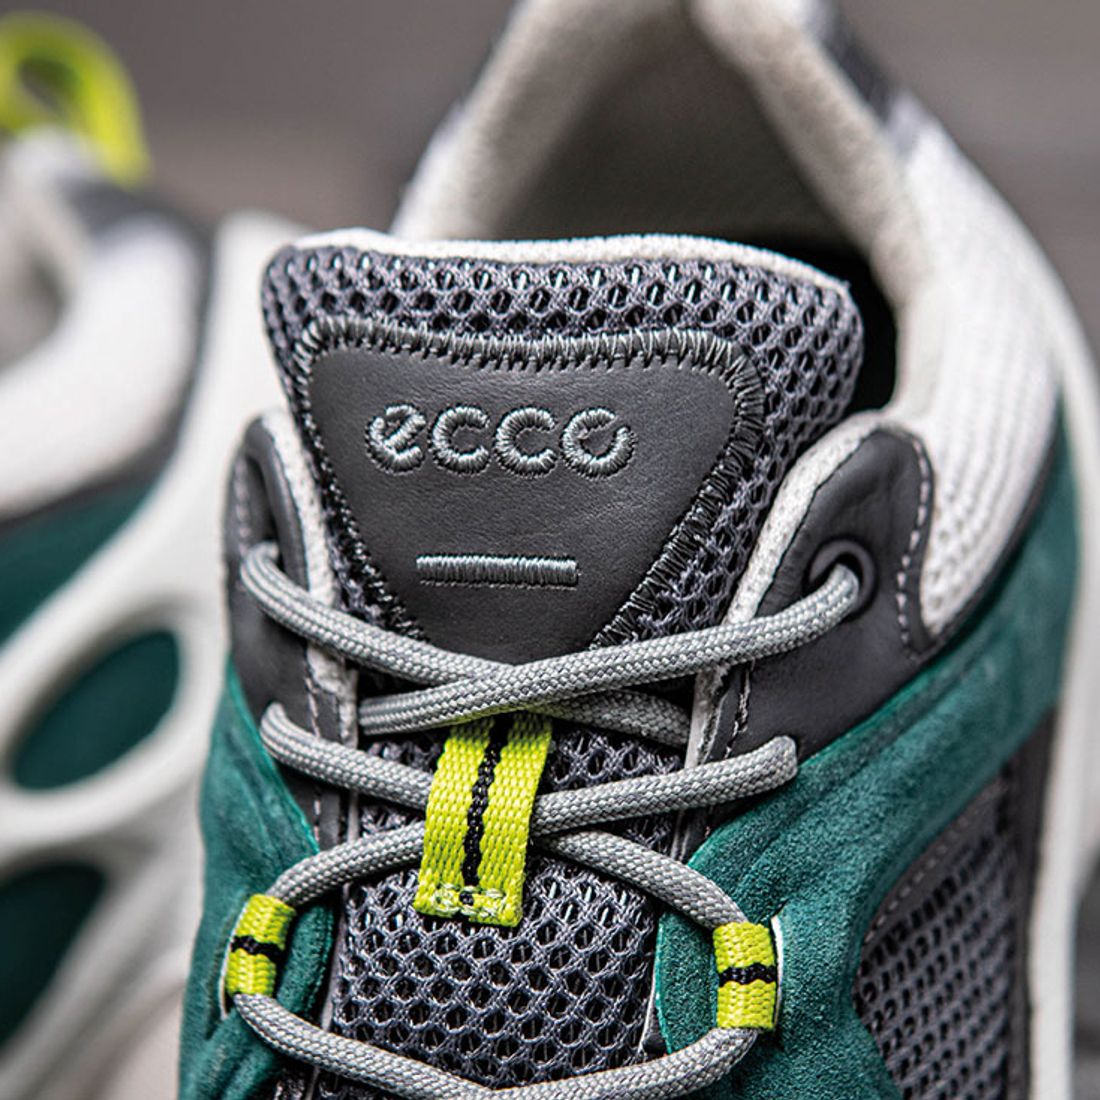 Ecco shoes history - join us as we explore Ecco's journey